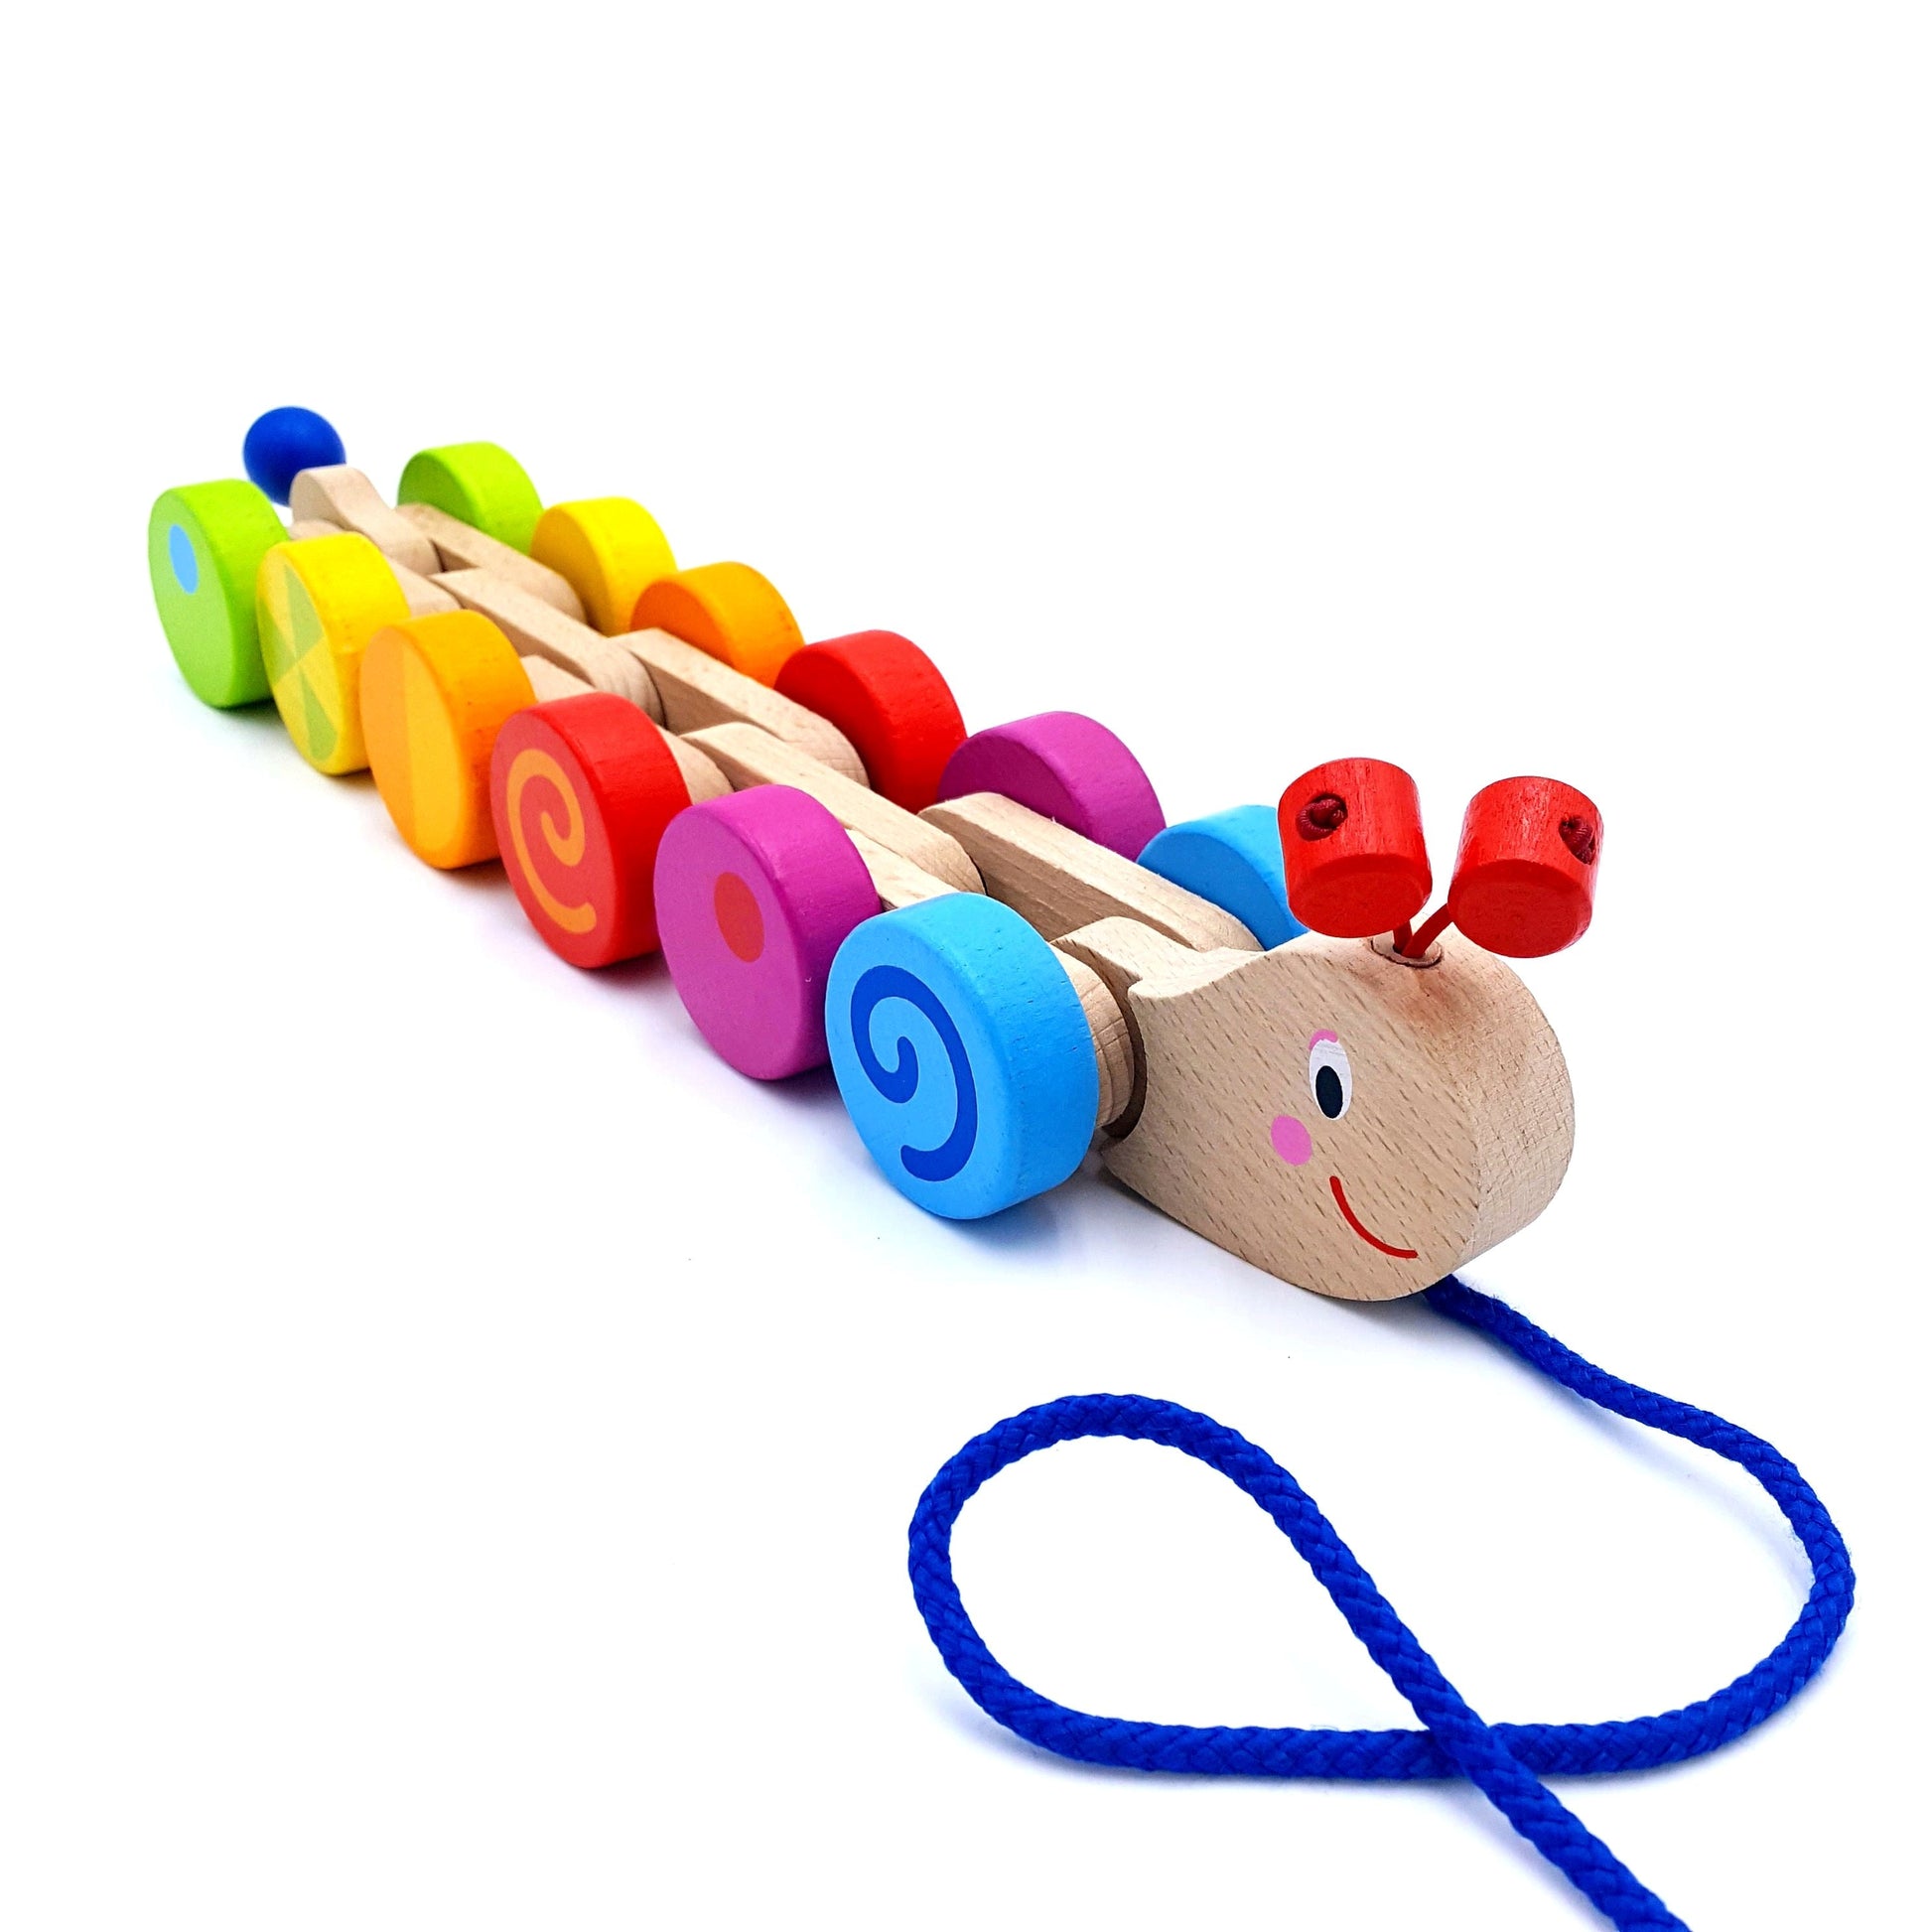 Colourful wooden caterpillar pull toy, with linking body segements.